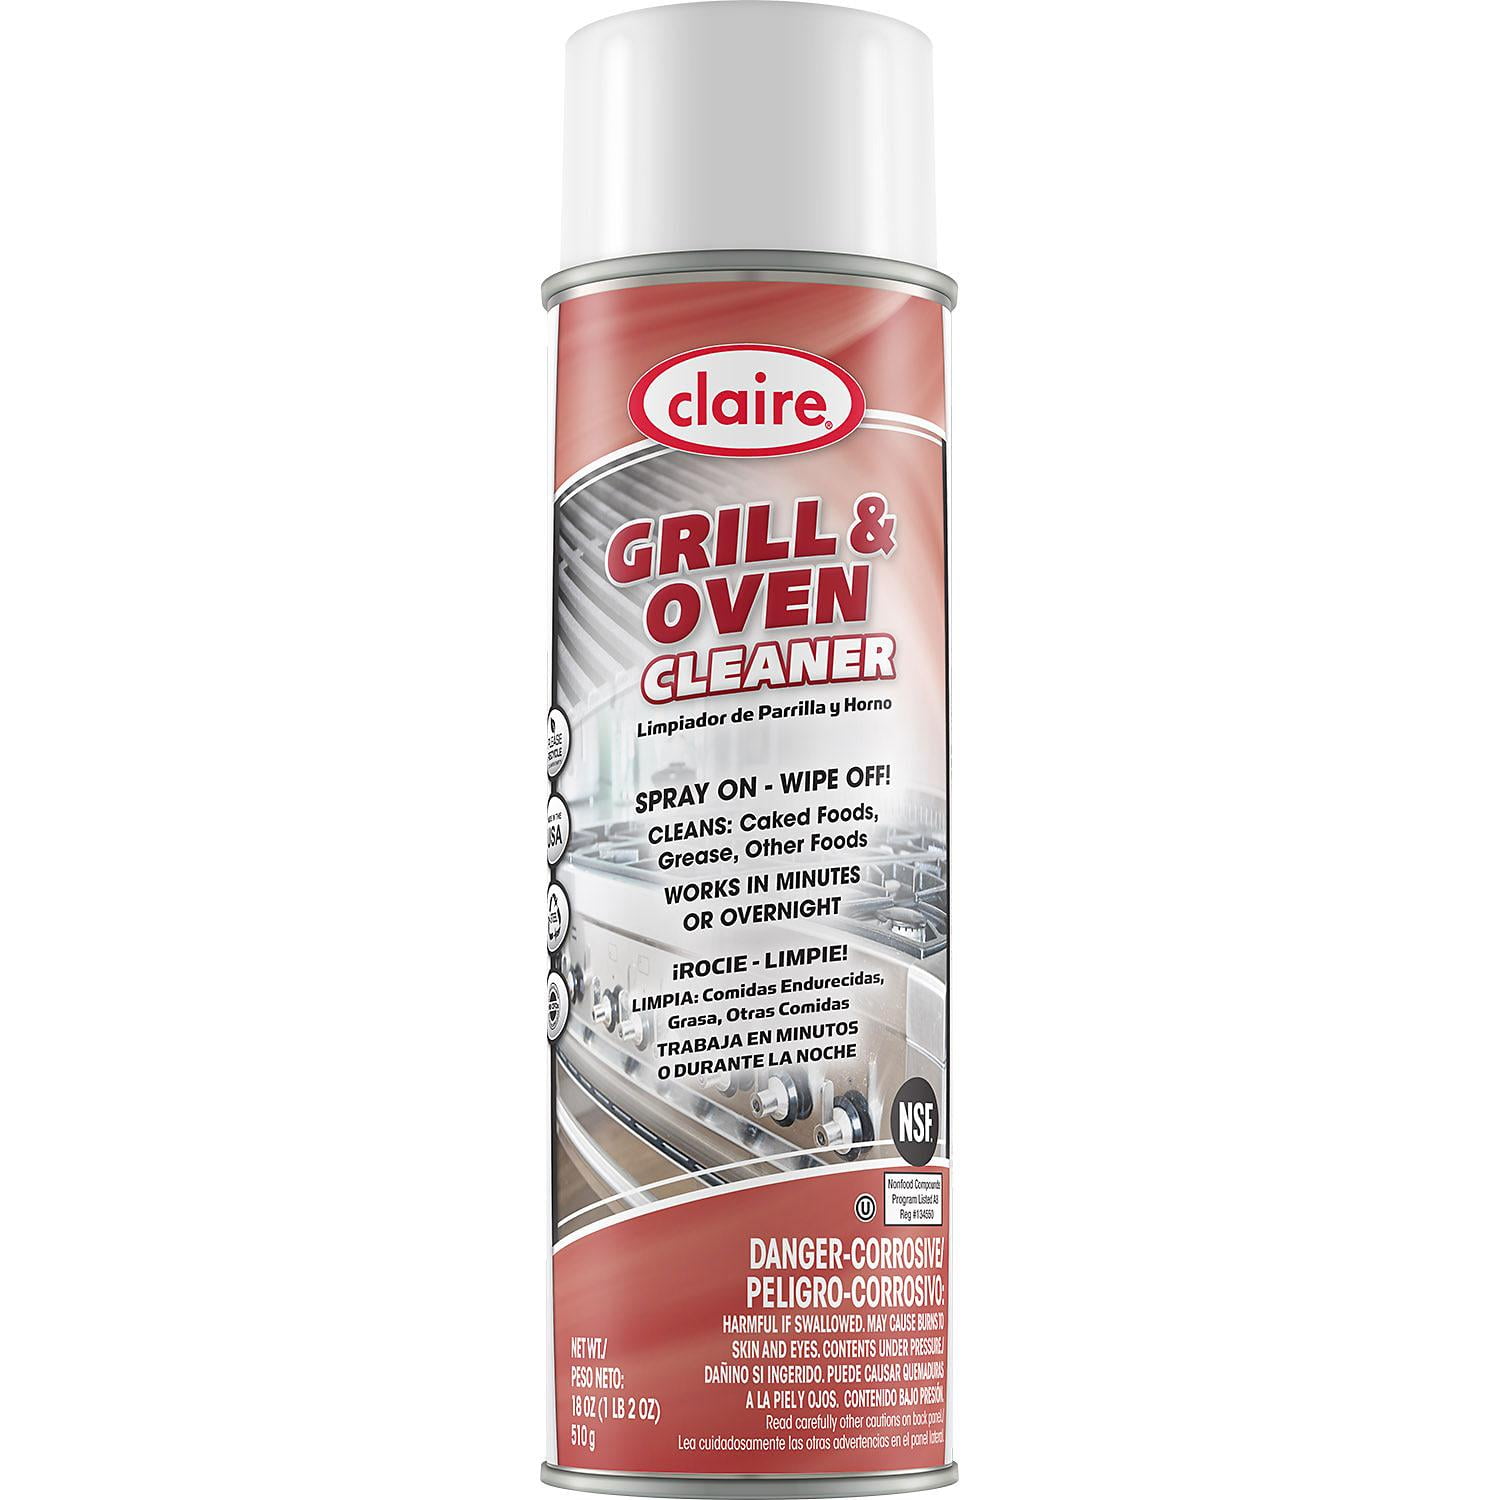 Oven & Grill Cleaner, Gel